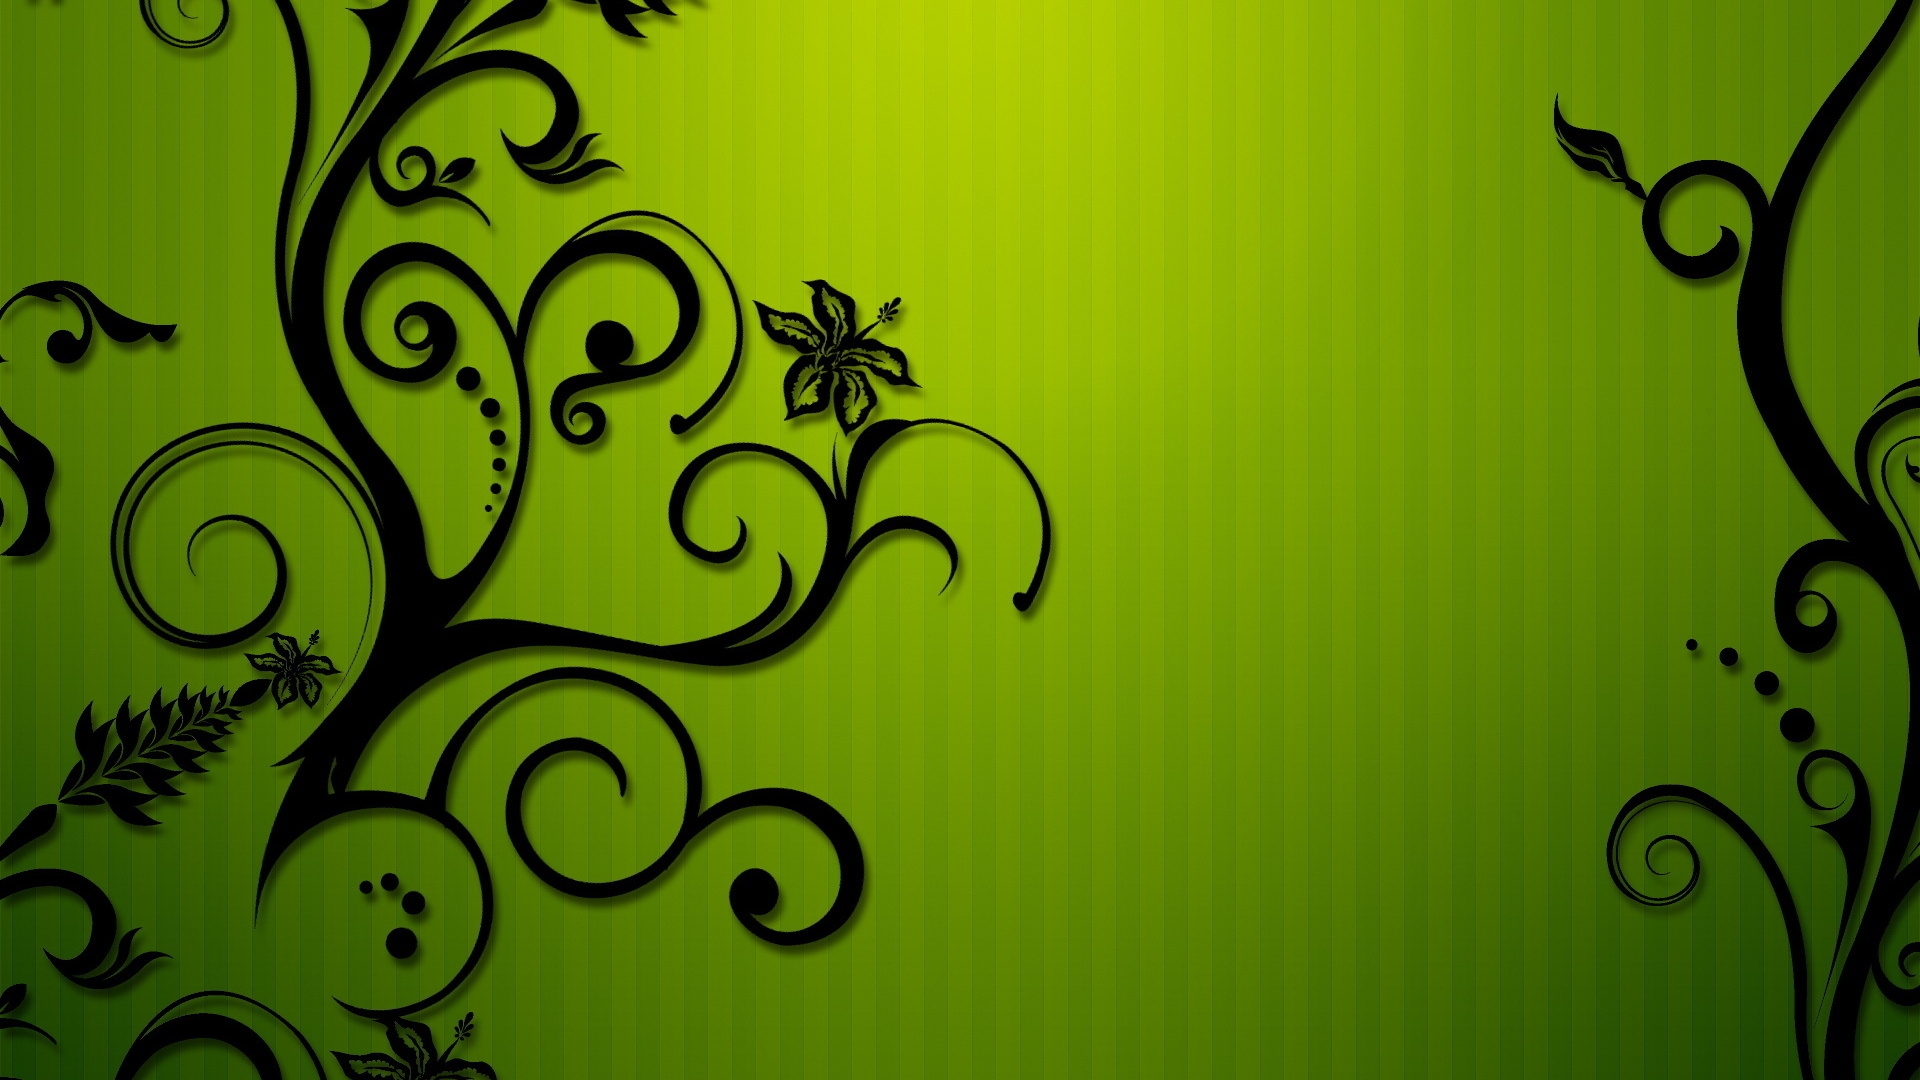 Floral Shapes for 1920 x 1080 HDTV 1080p resolution